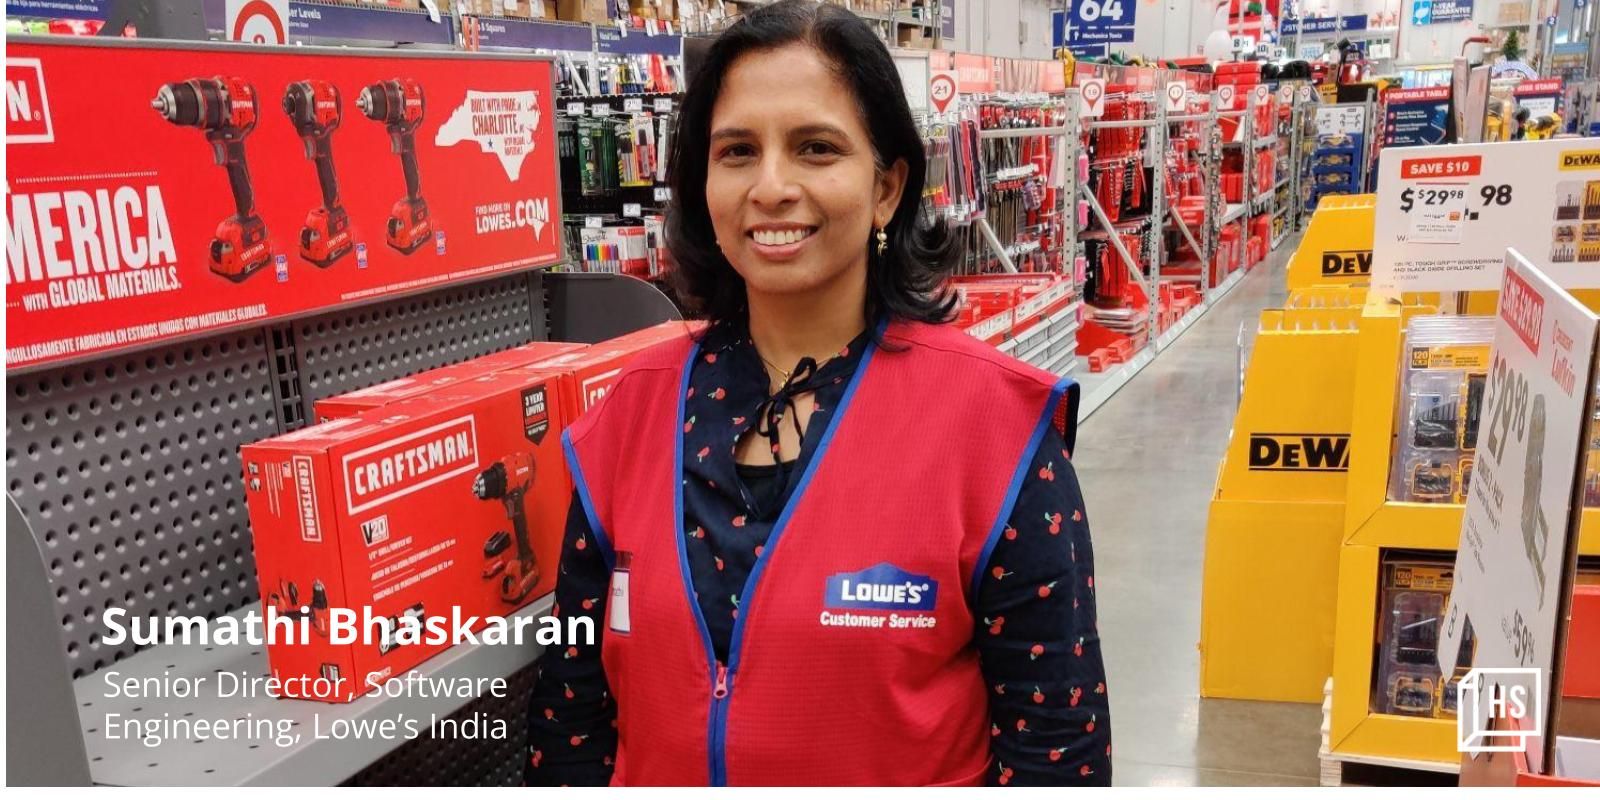 Why Lowe’s Sumathi Bhaskaran believes in creating ecosystems for women to thrive in organisations